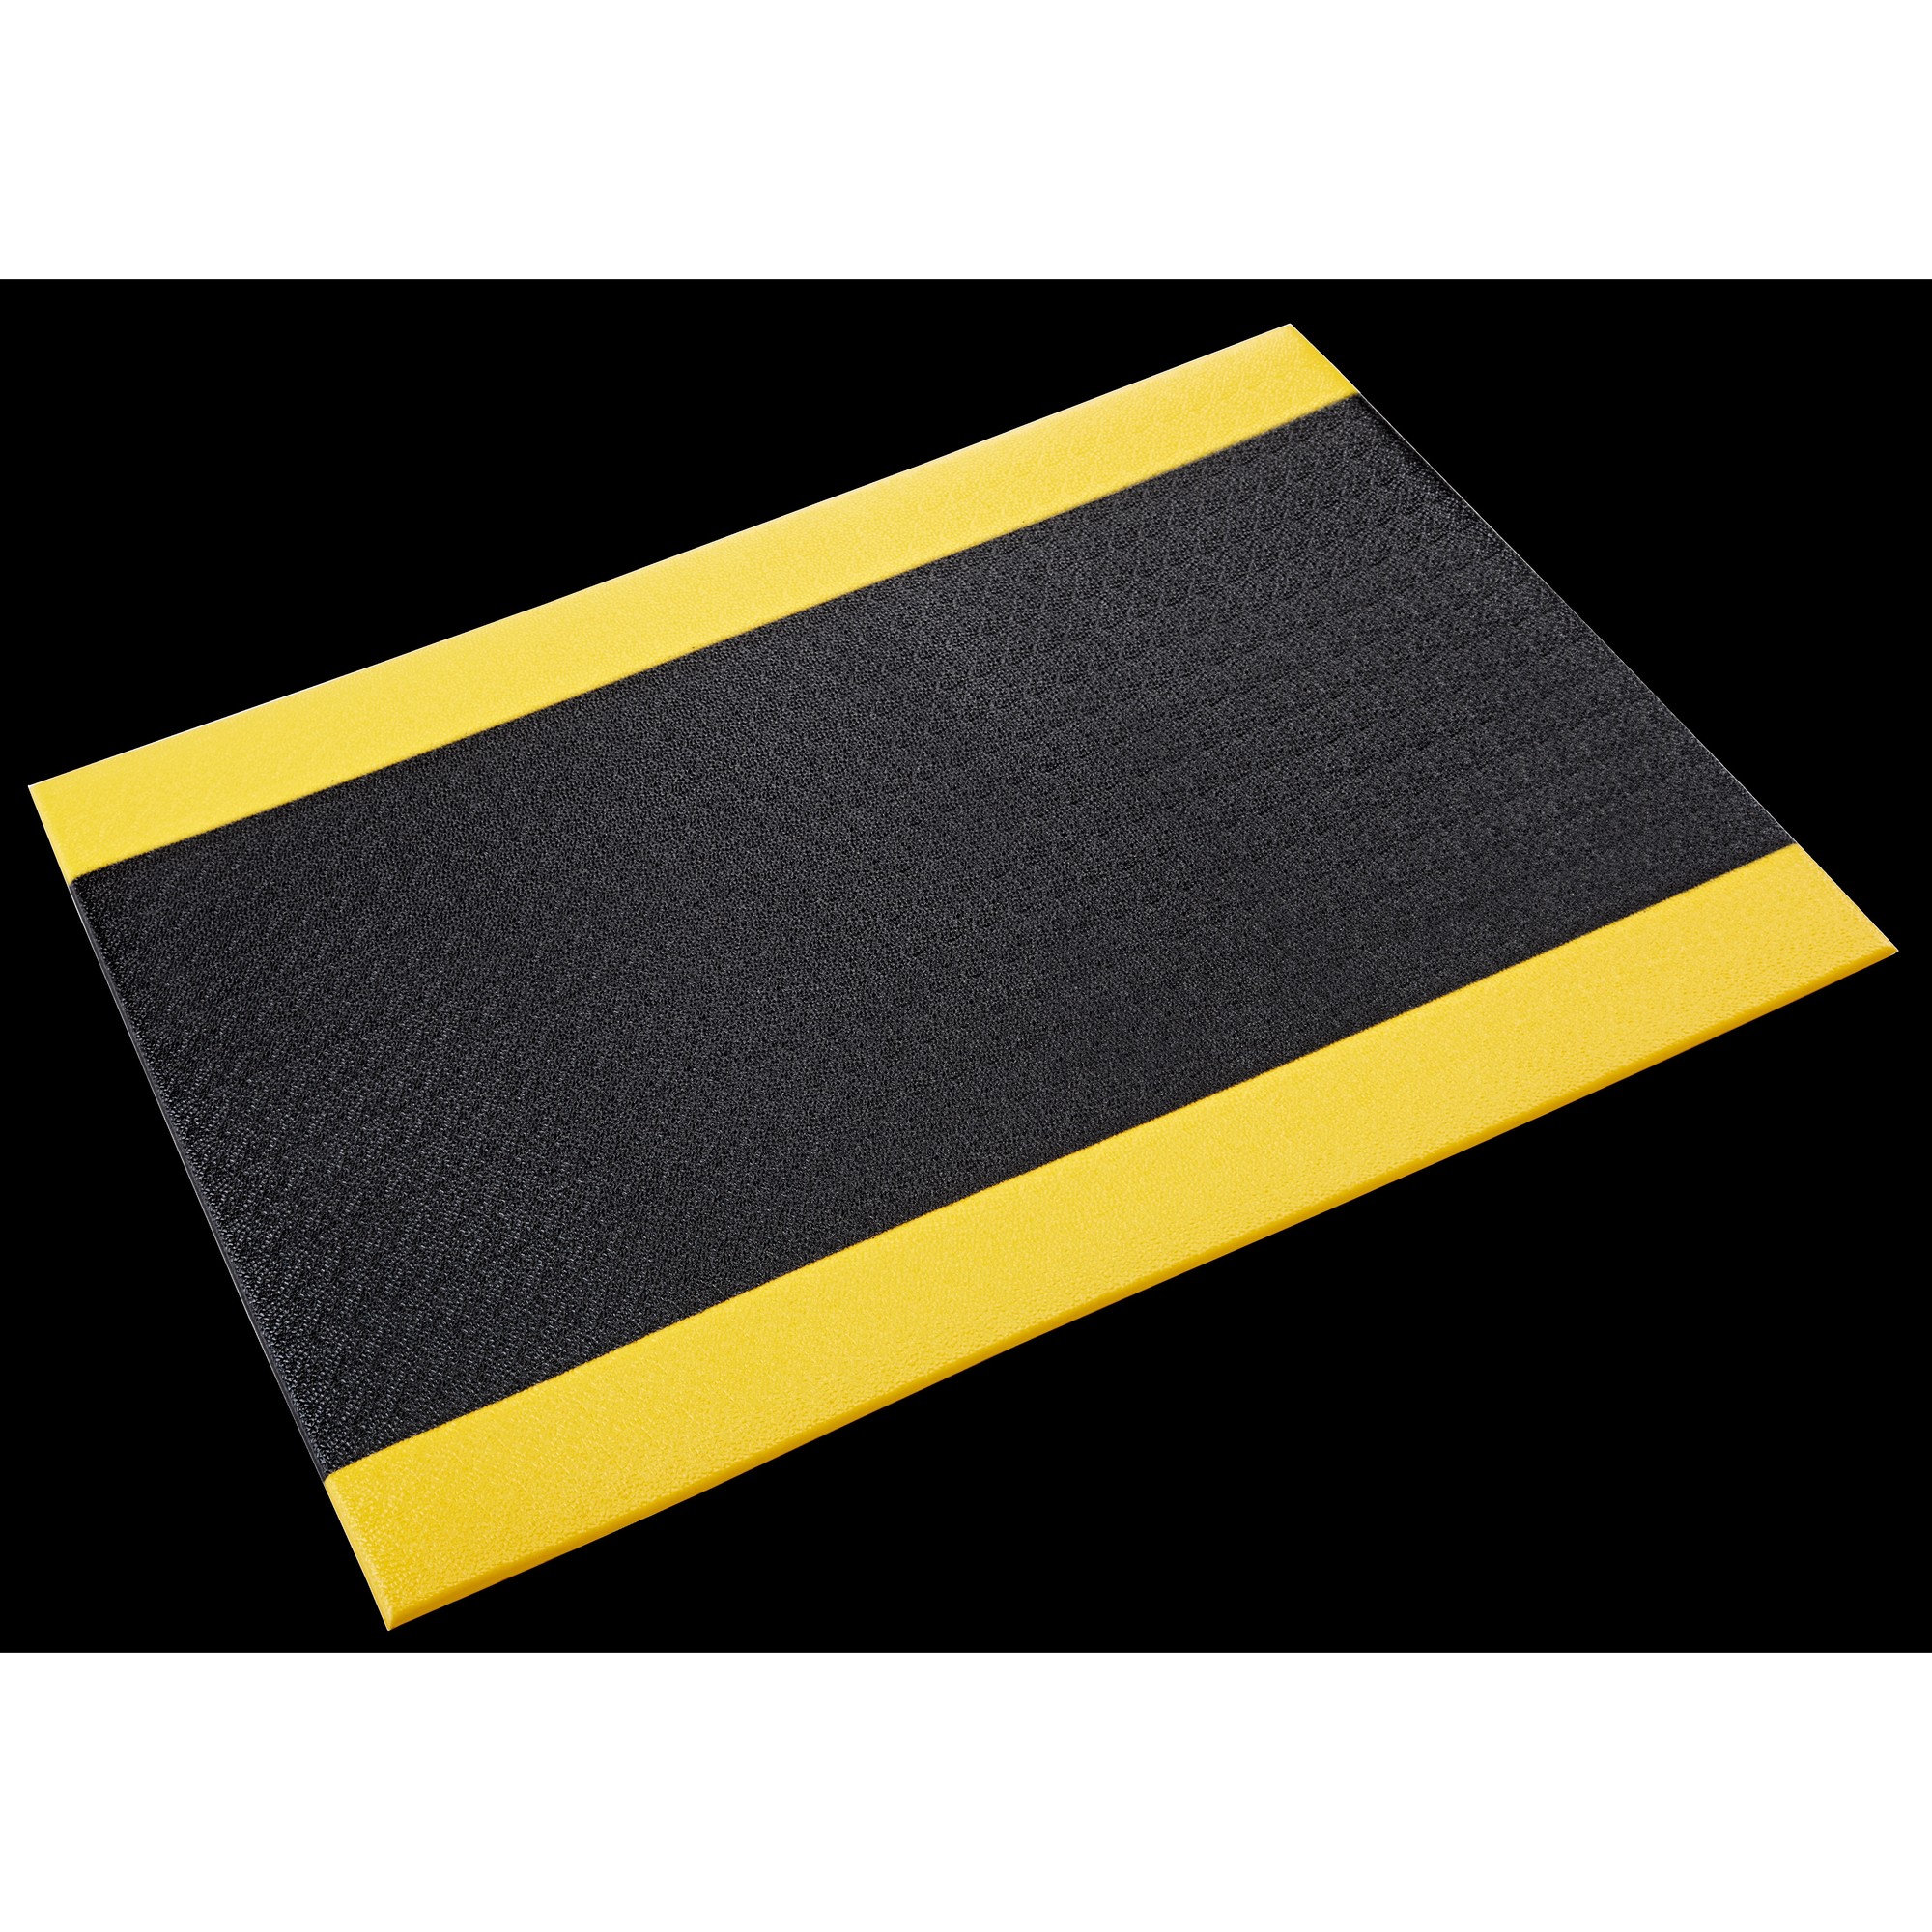 Crown Matting Technologies, Tuff-Spun 3/8 Pebble-Surface 2ft.x3ft. Black w/Yellow, Width 24 in, Length 36 in, Thickness 3/8 in, Model SE 3823BP